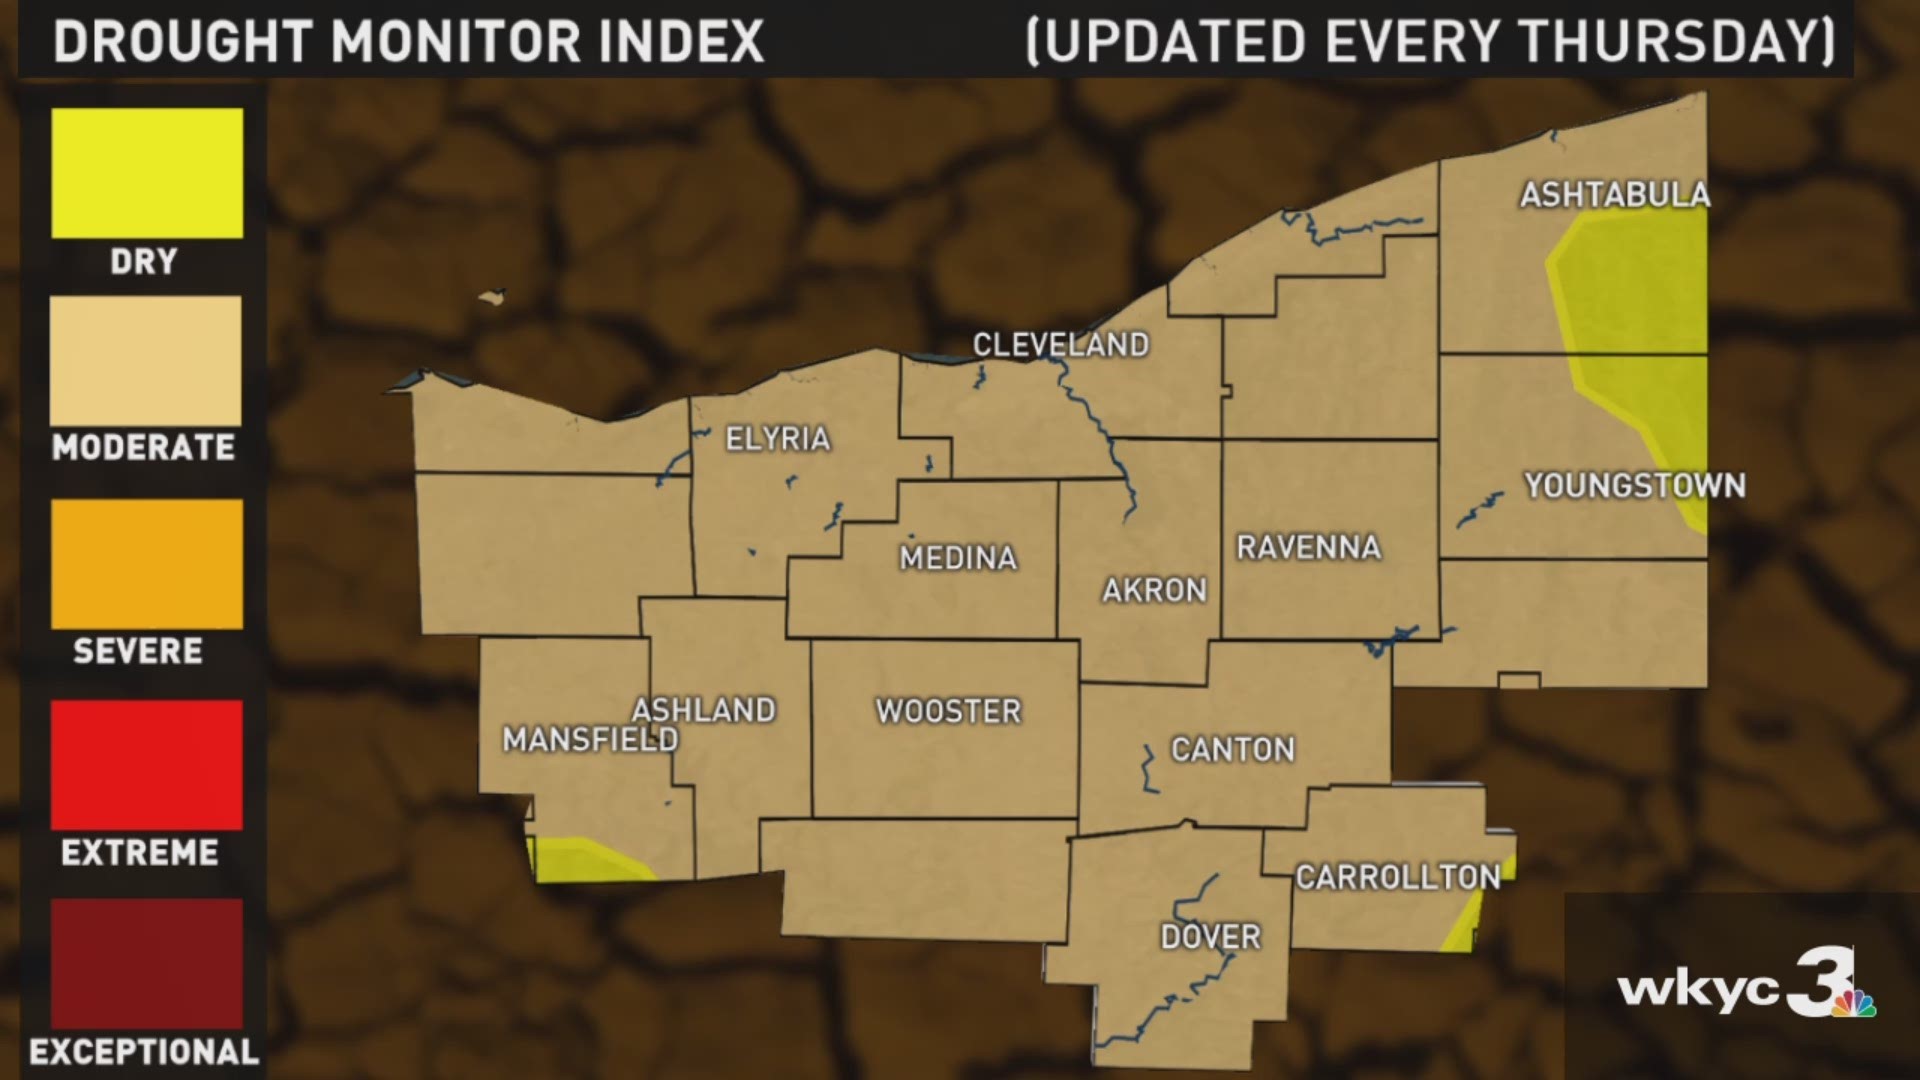 Moderate drought now covers 34% of Ohio.